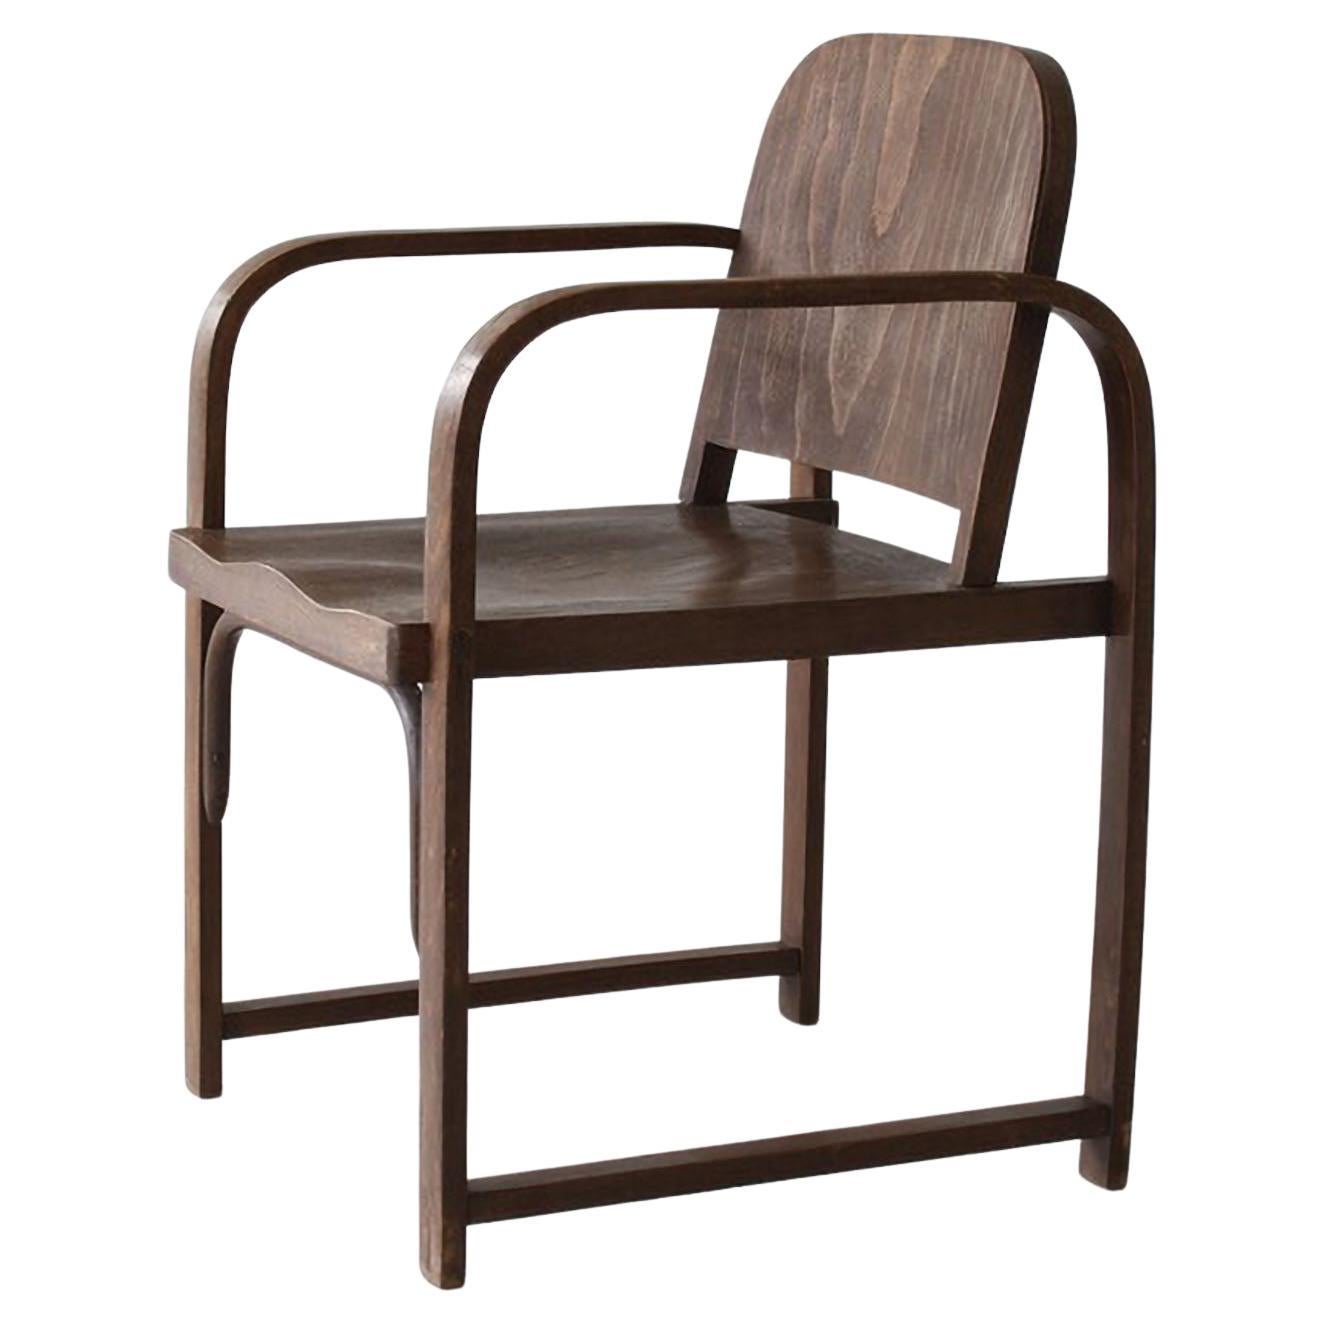 Modernist Thonet A 745/F Armchair manufactured by Tatra, Stained Wood, c. 1930 For Sale